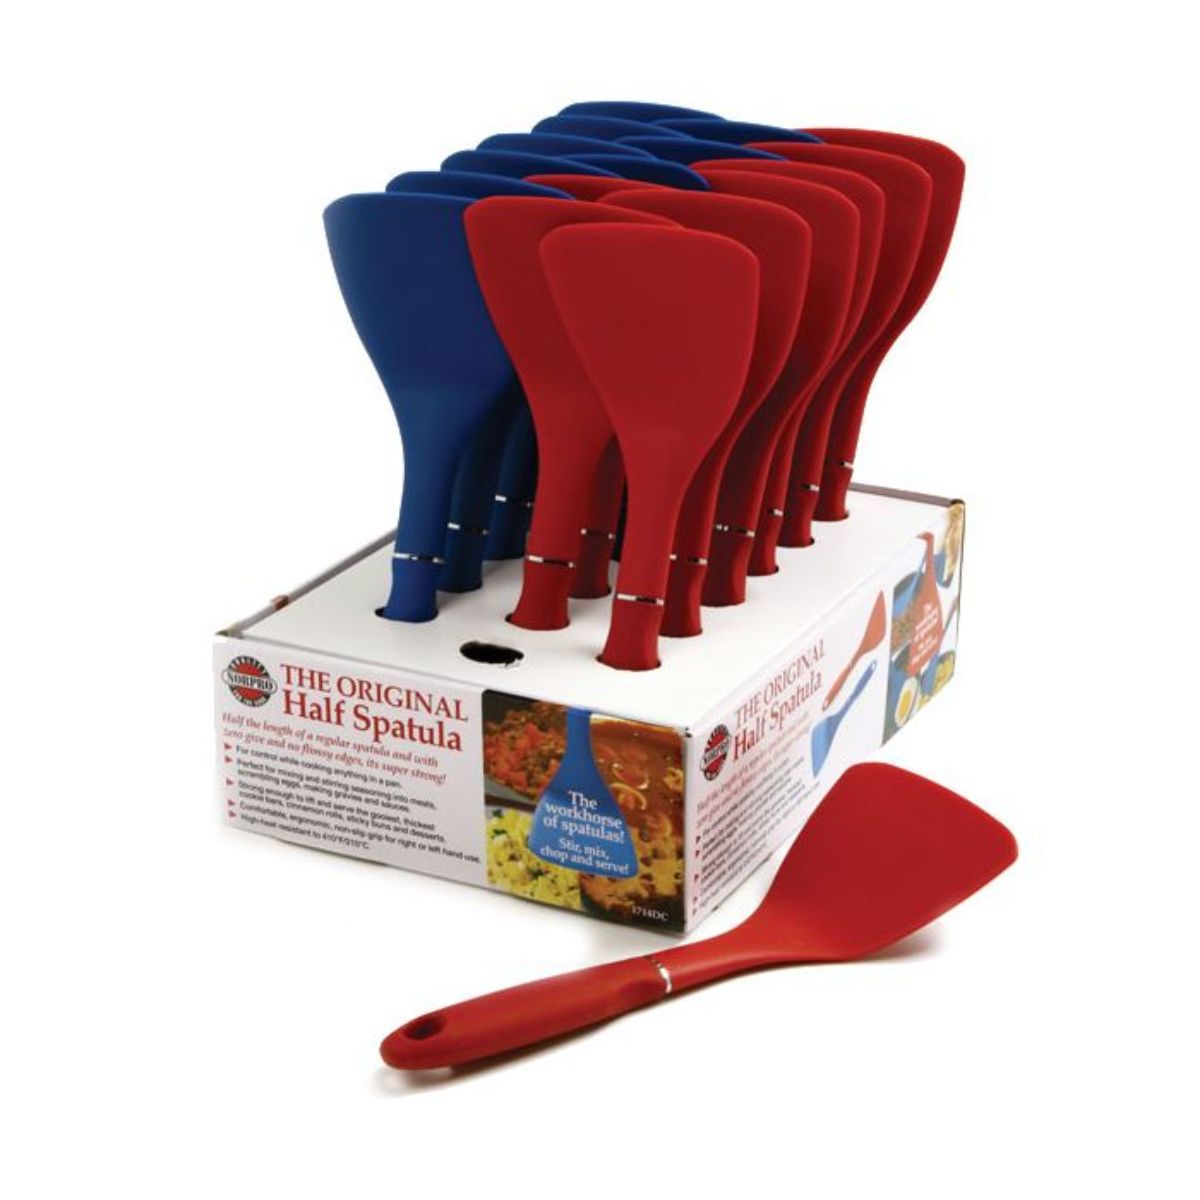 Norpro Silicone Large Scoop Spatula, Red, One Size, As Shown